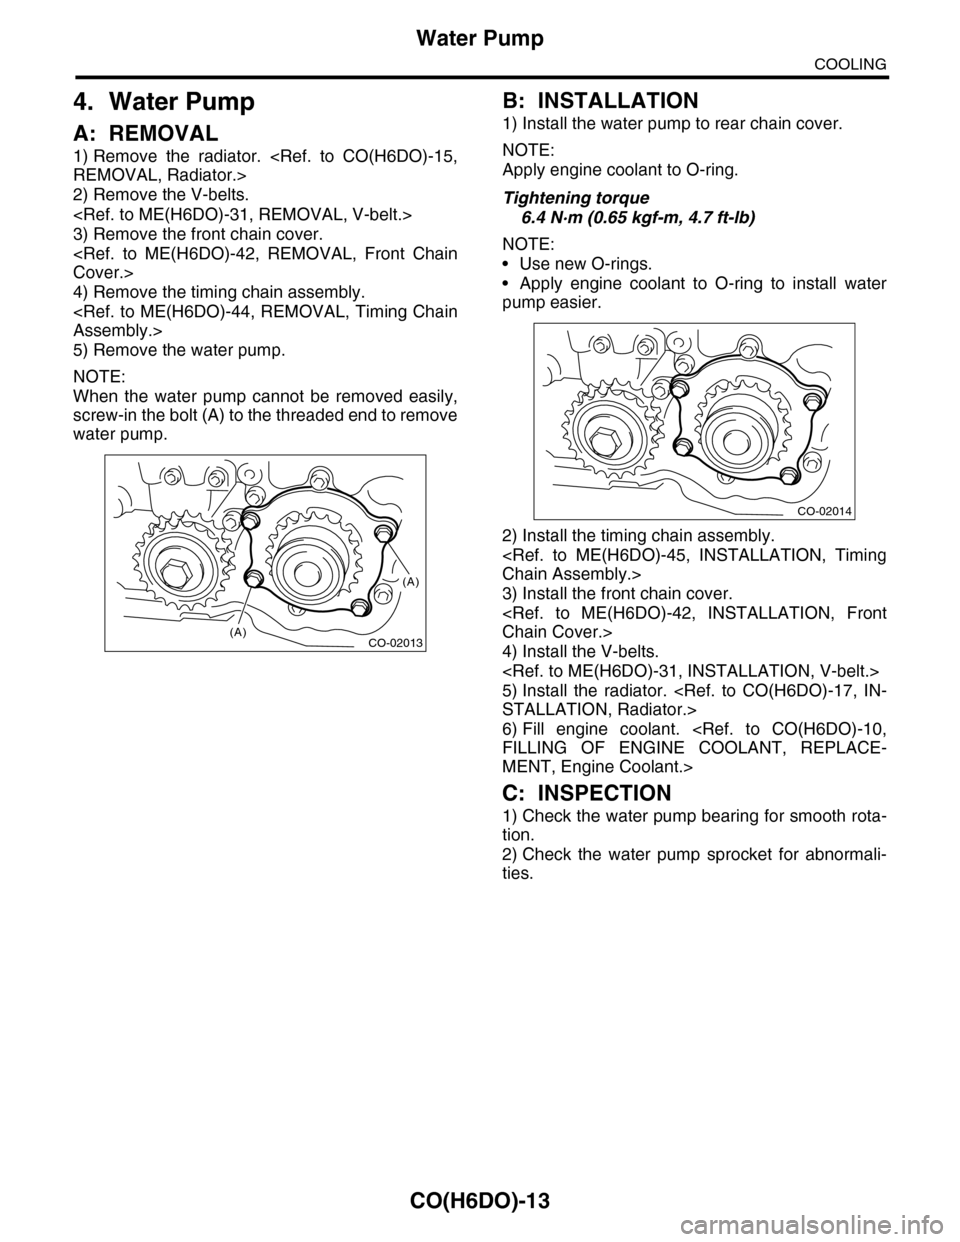 SUBARU TRIBECA 2009 1.G Service Workshop Manual CO(H6DO)-13
Water Pump
COOLING
4. Water Pump
A: REMOVAL
1) Remove  the  radiator.  <Ref.  to  CO(H6DO)-15,
REMOVAL, Radiator.>
2) Remove the V-belts.
<Ref. to ME(H6DO)-31, REMOVAL, V-belt.>
3) Remove 